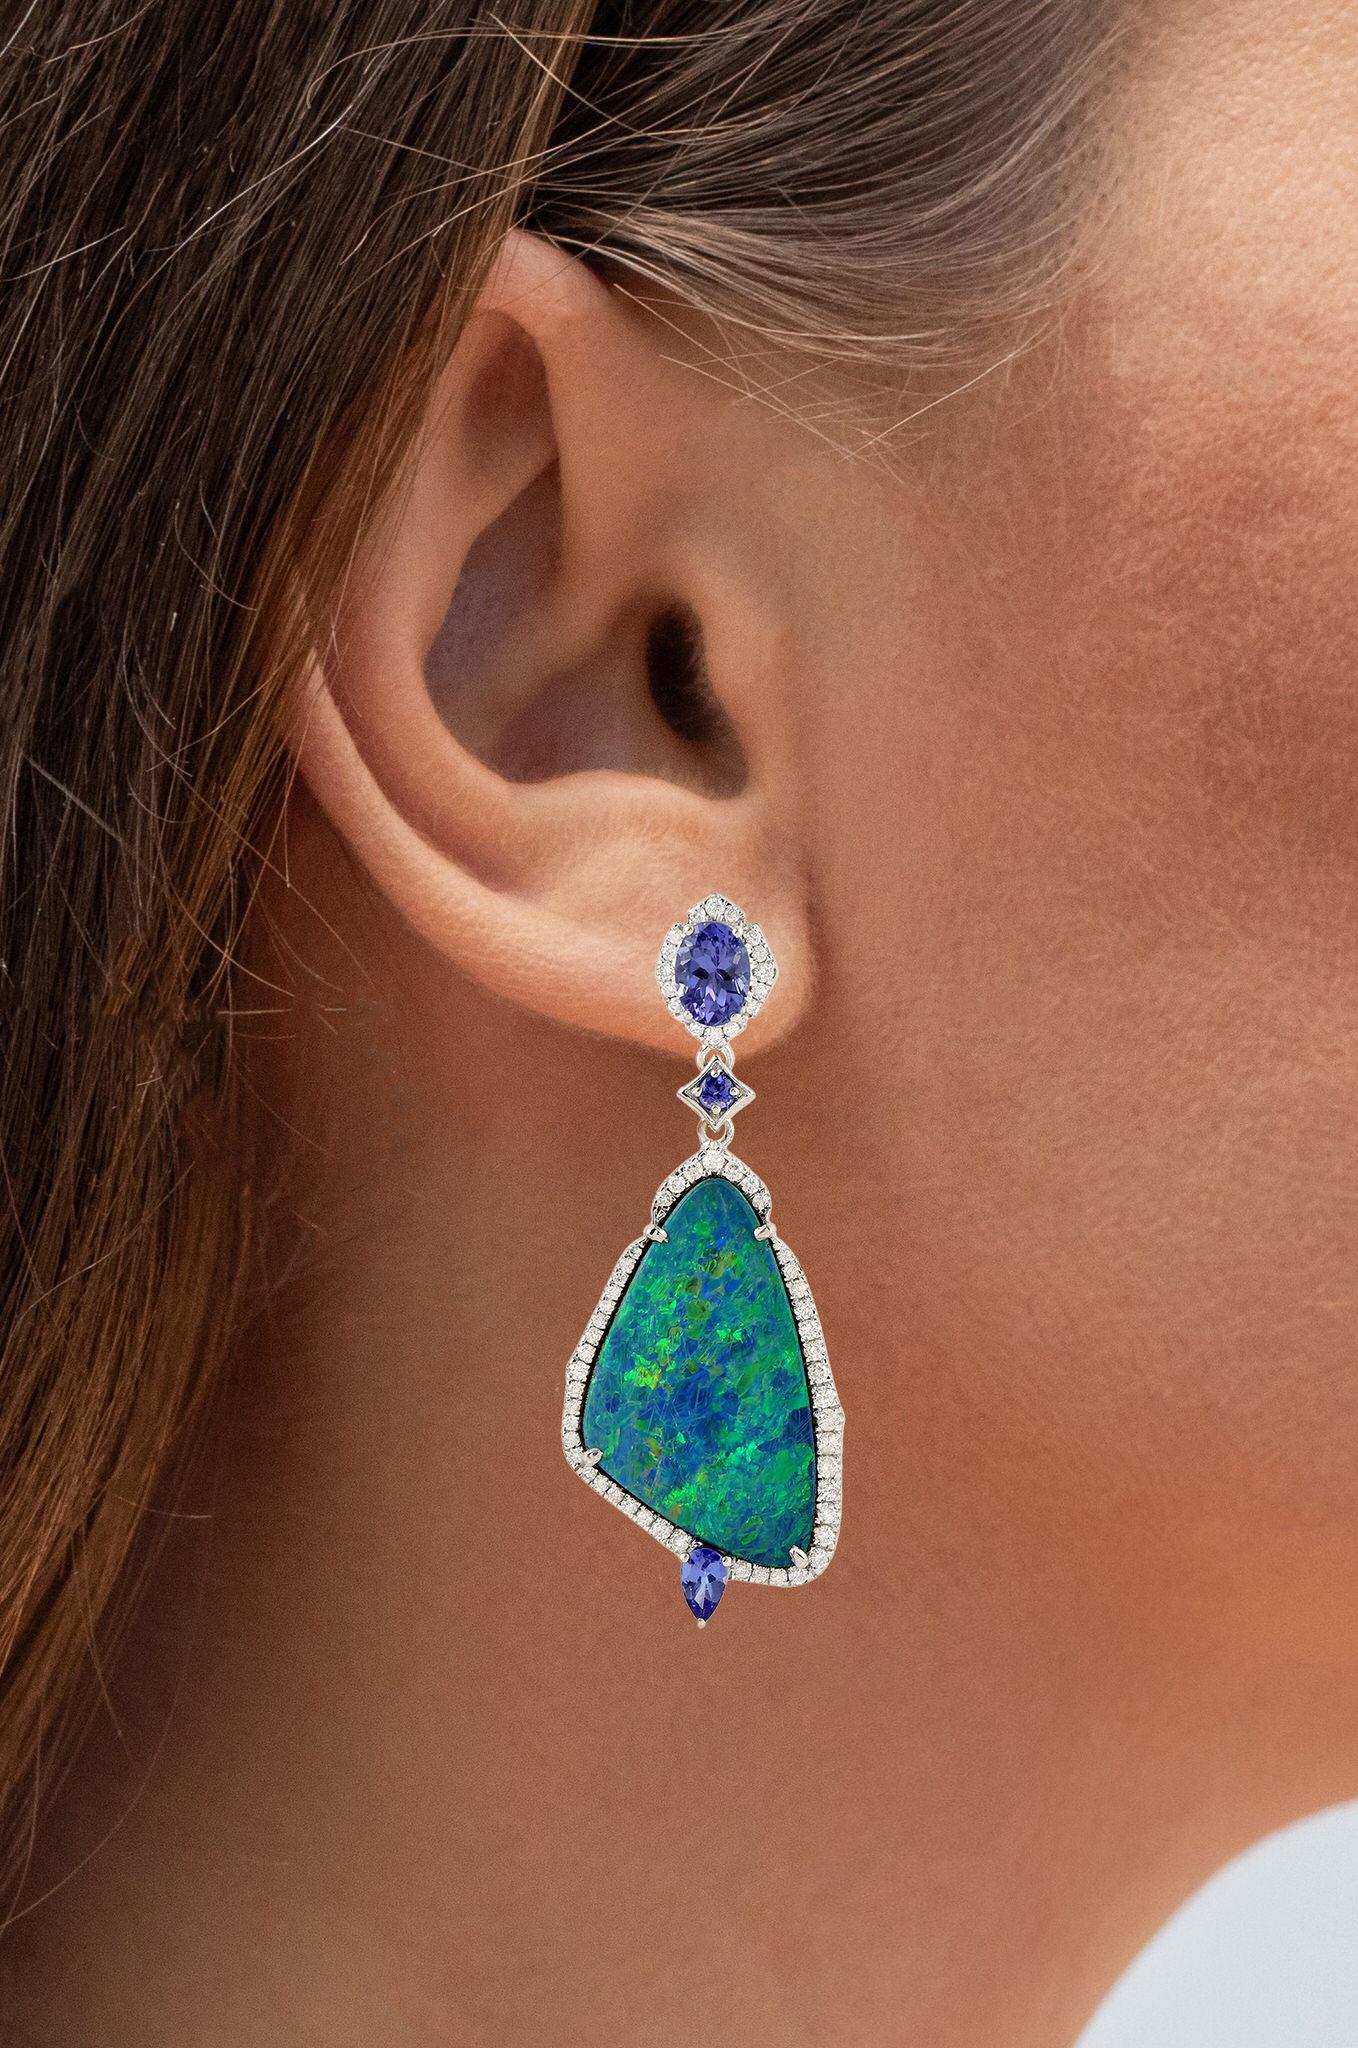 Contemporary Black Opal Dangle Earrings With Tanzanites and Diamonds 24 Carats 18K Gold